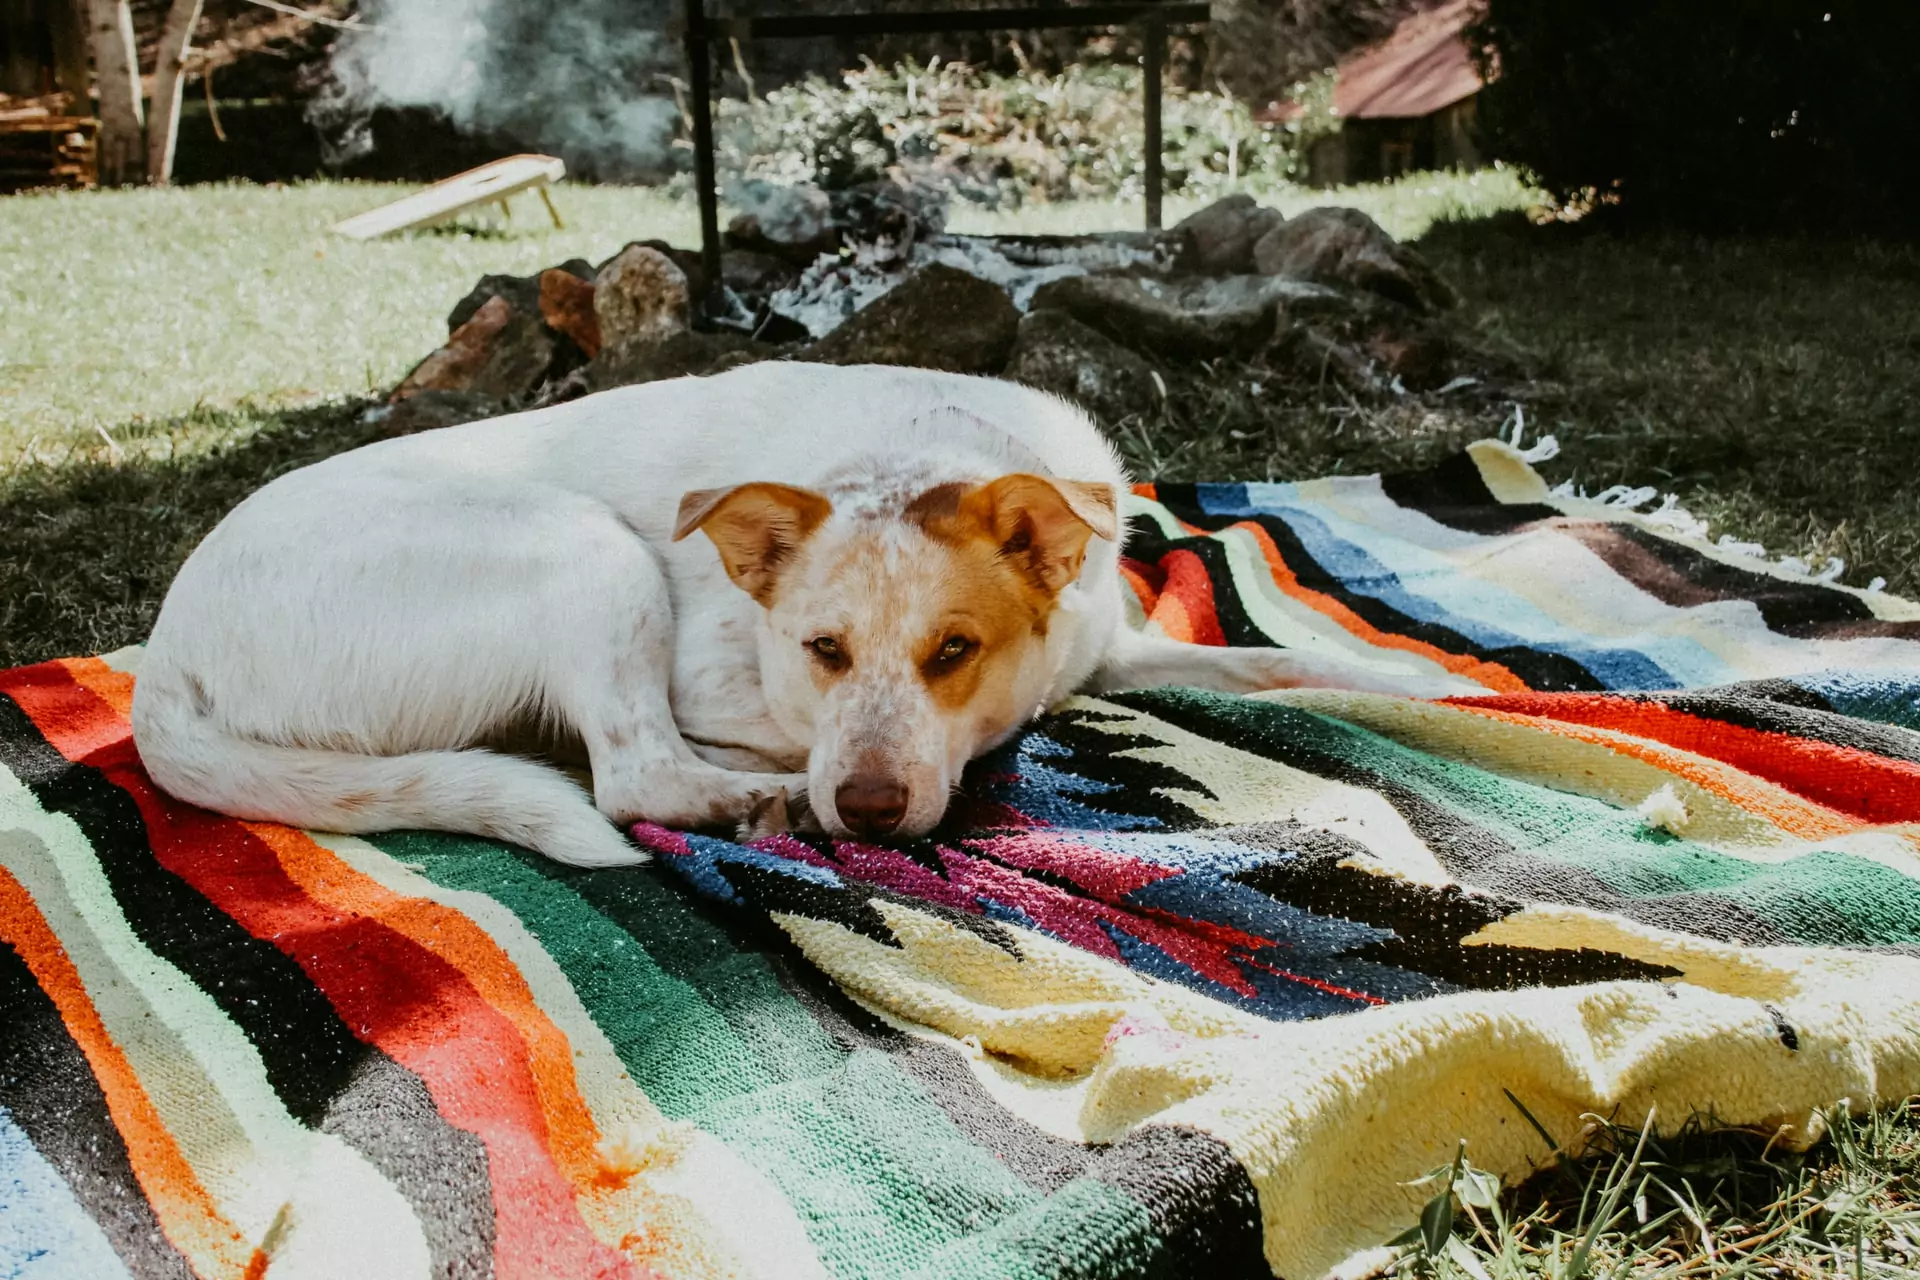 This pup is enjoying dog friendly camping